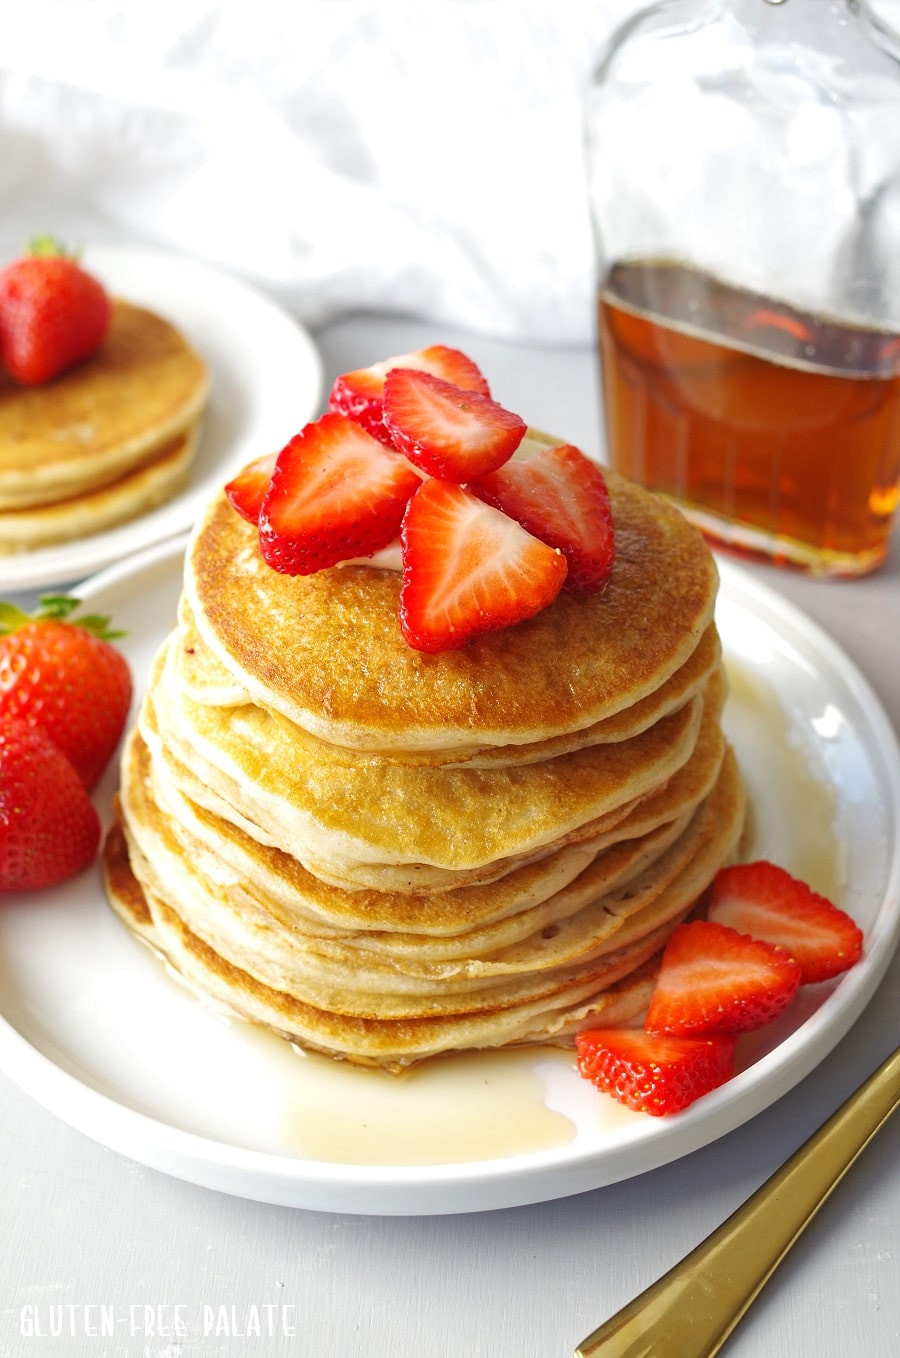 Pancakes Gluten Free
 Fluffy Gluten Free Pancakes – Mix now or save for later